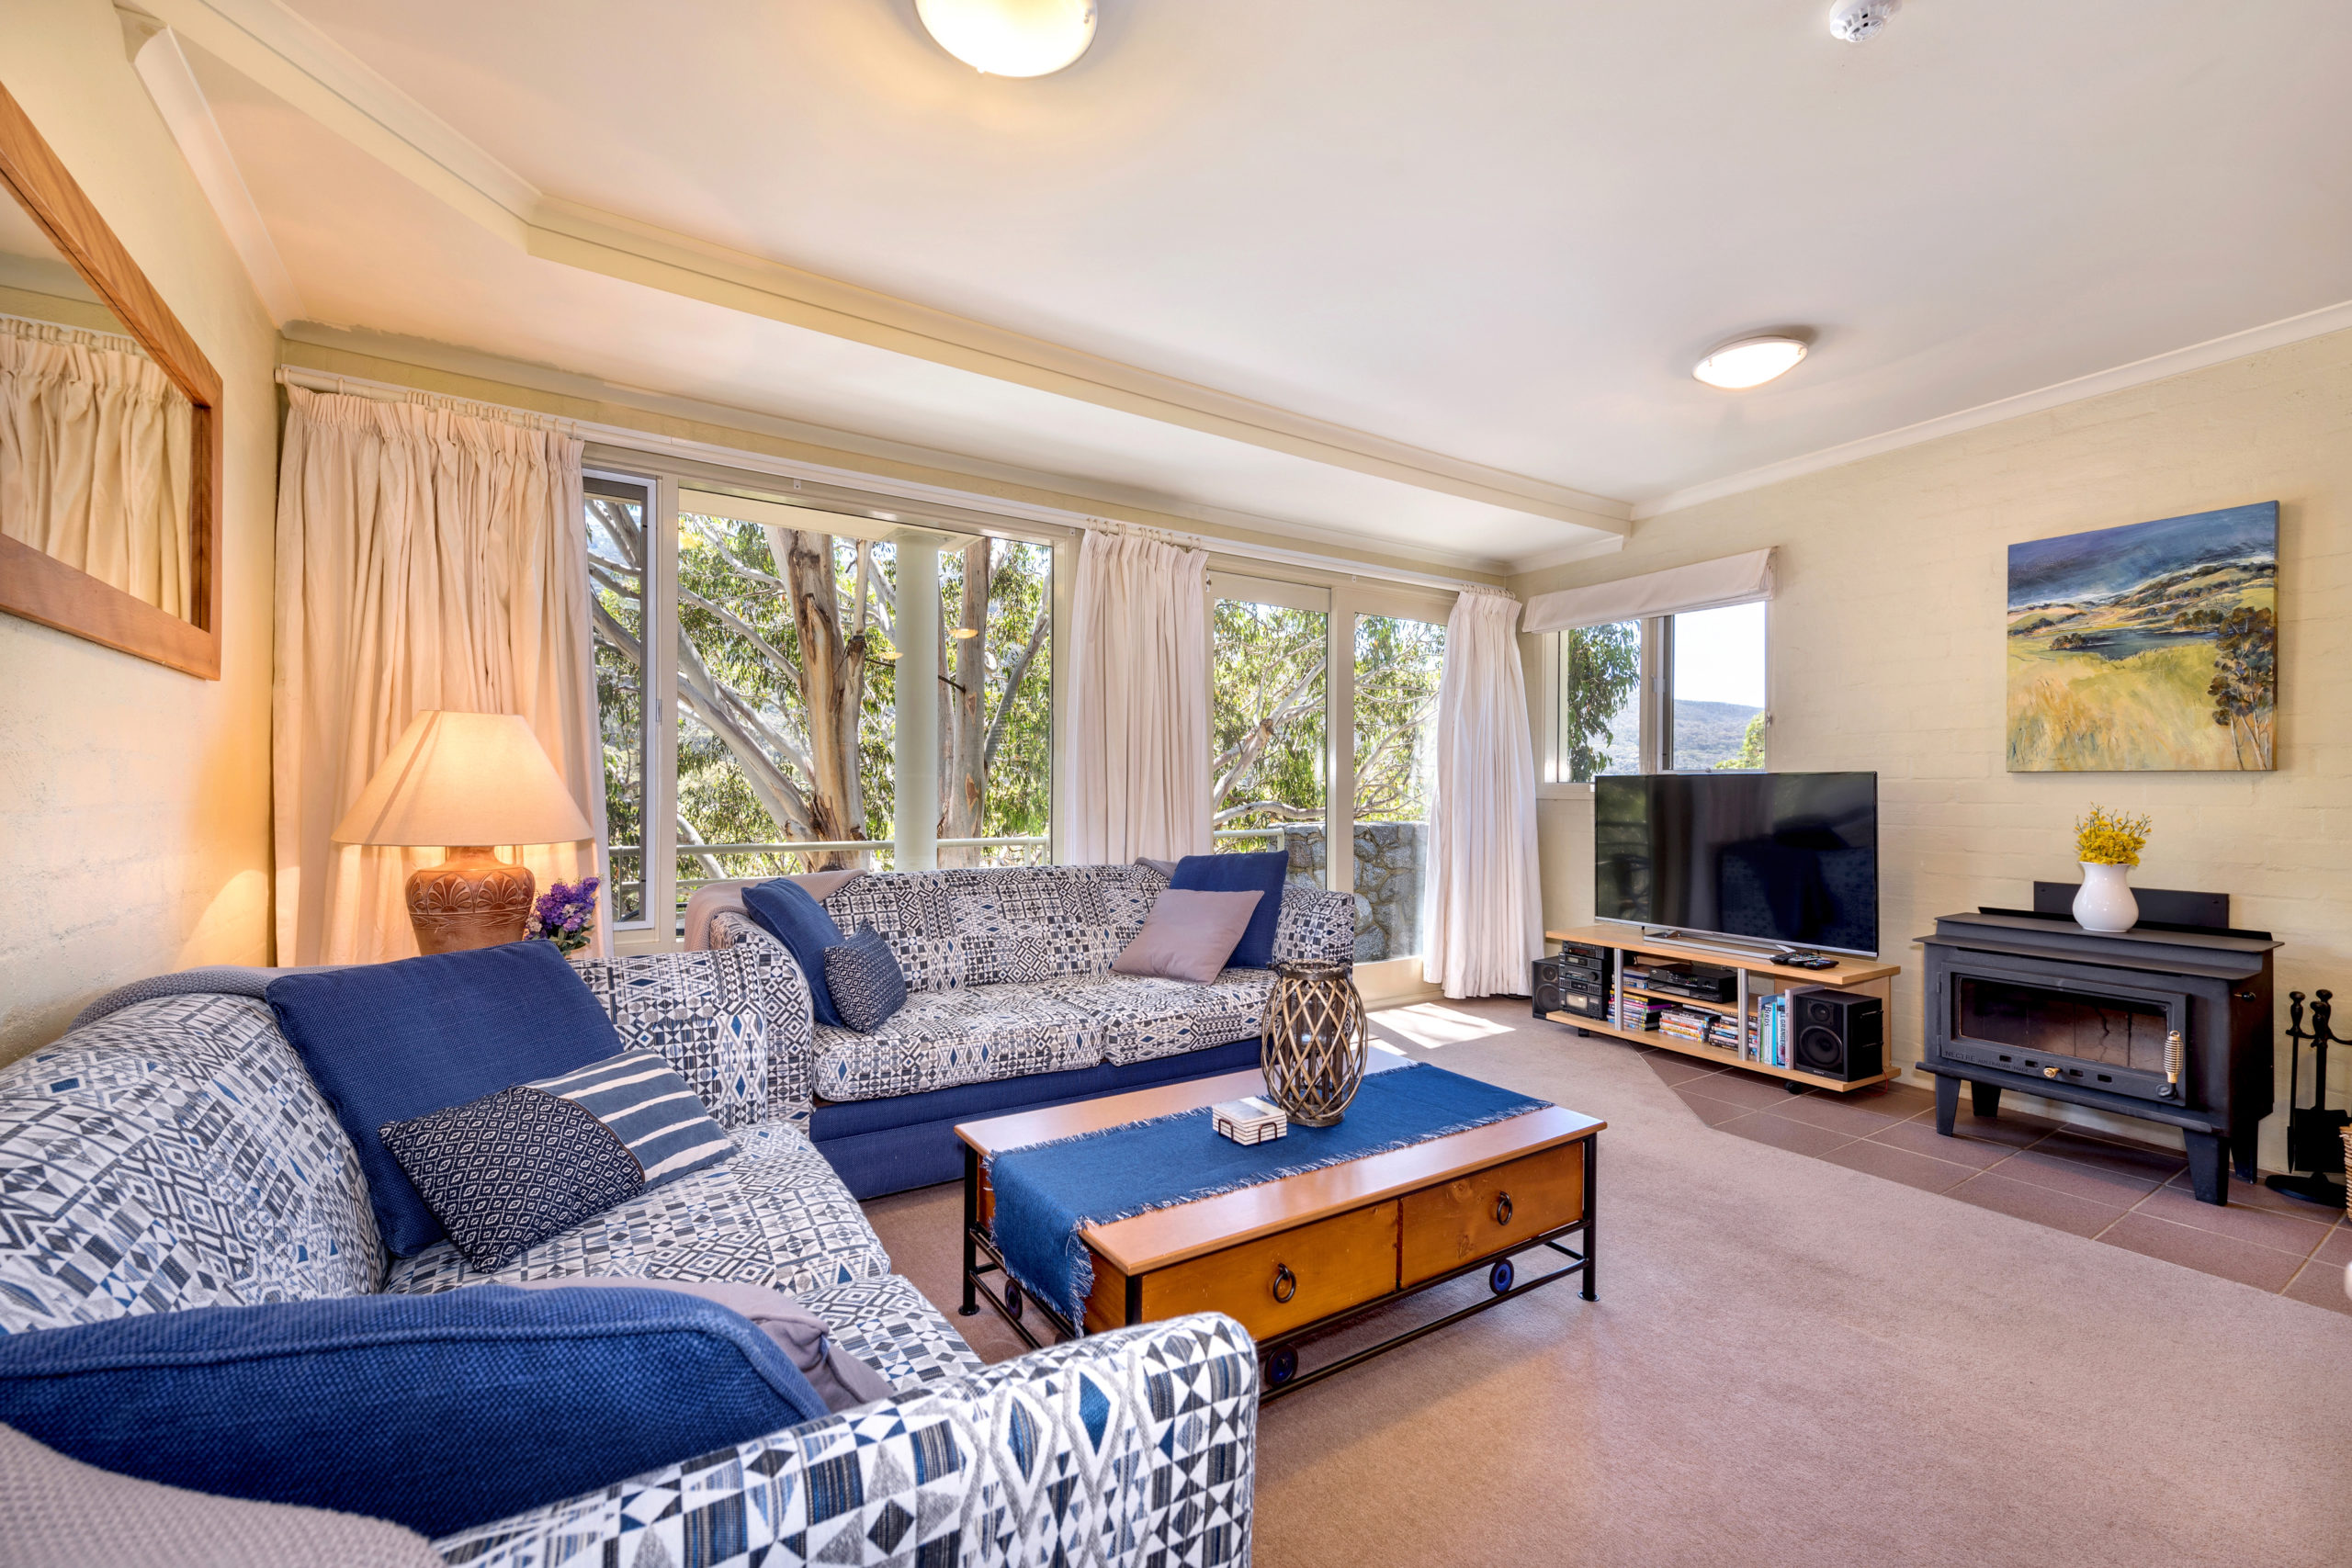 One Bedroom with Study Ski Apartment Offering Stunning Views Over The Mountain! – $769,000